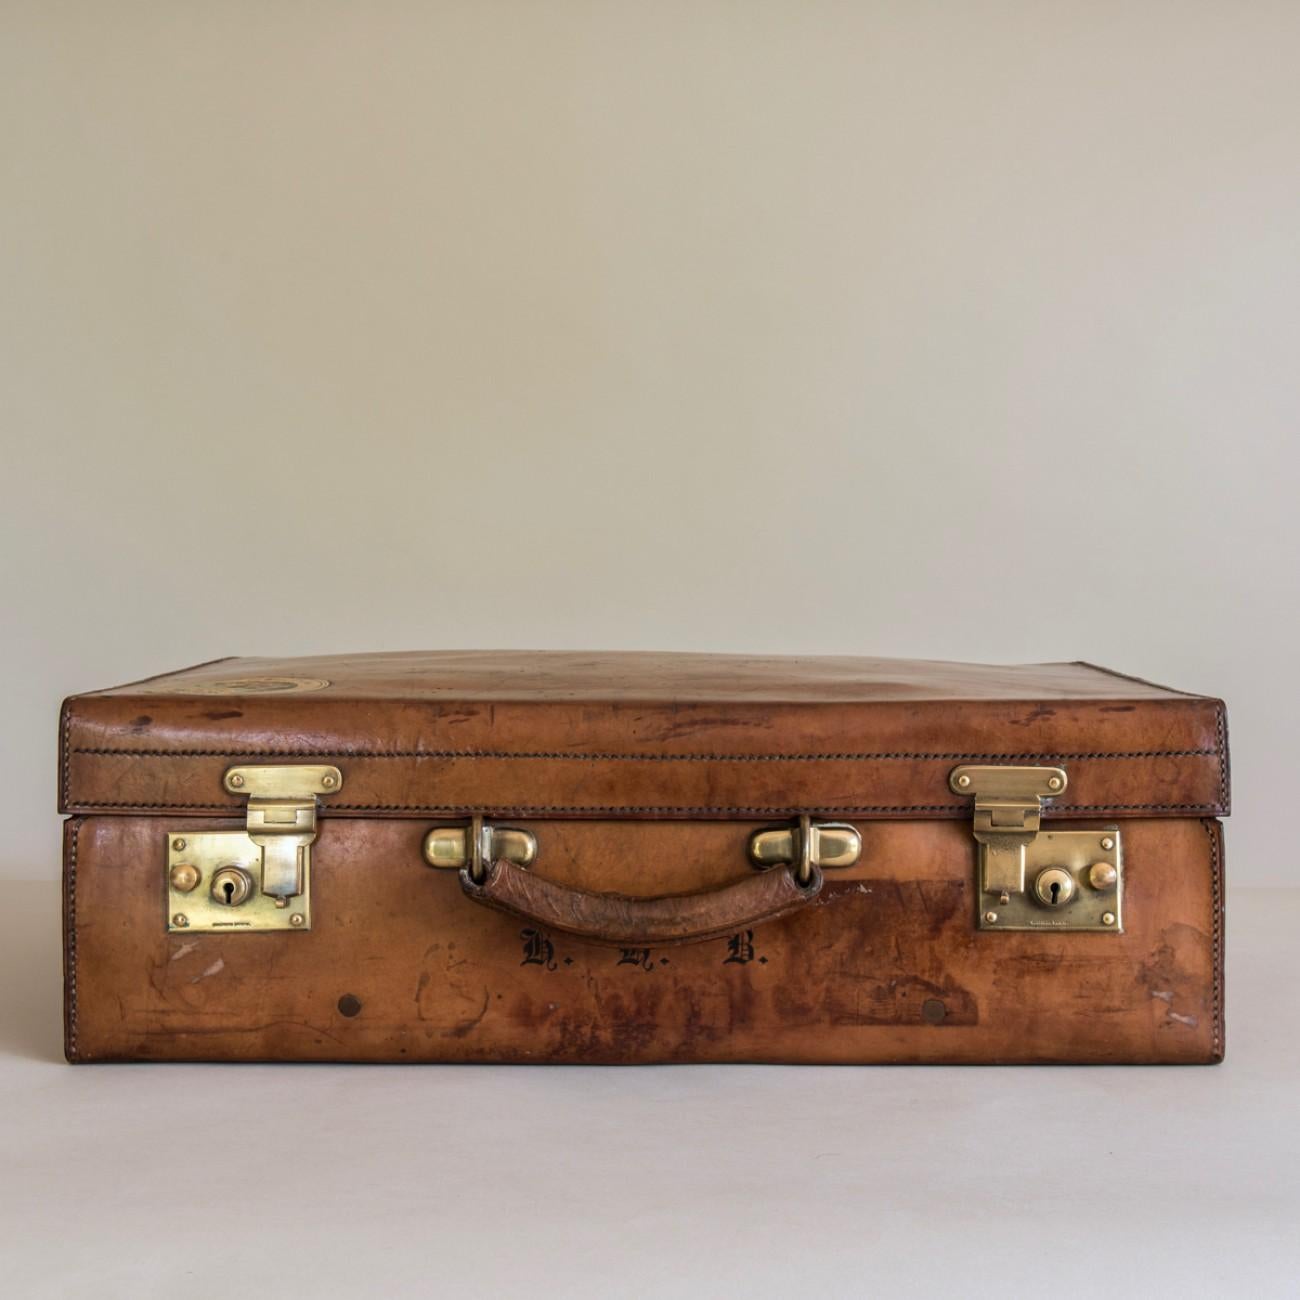 A fine Brachers of Bristol and Cardiff suitcase circa 1900 in veg-tanned, heavy-gauge, hand-stitched cow-hide. 
This is a good example of their superb luggage, the best of British craftsmanship. The case has been well used and has developed a lovely